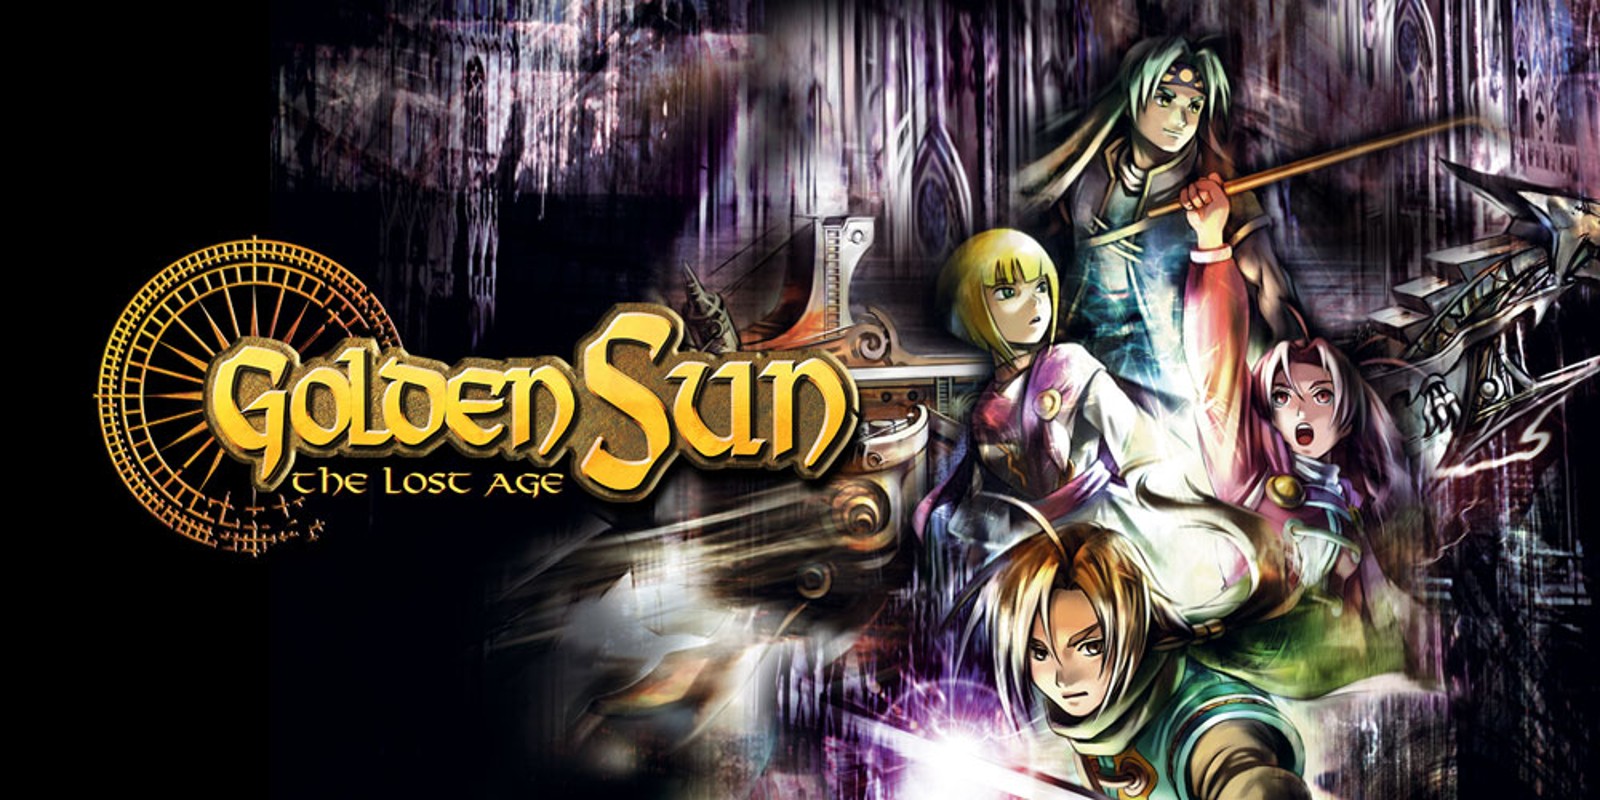 On 17 January, Golden Sun and Golden Sun will be added to the Nintendo Switch Onlie catalogue: The Lost Age